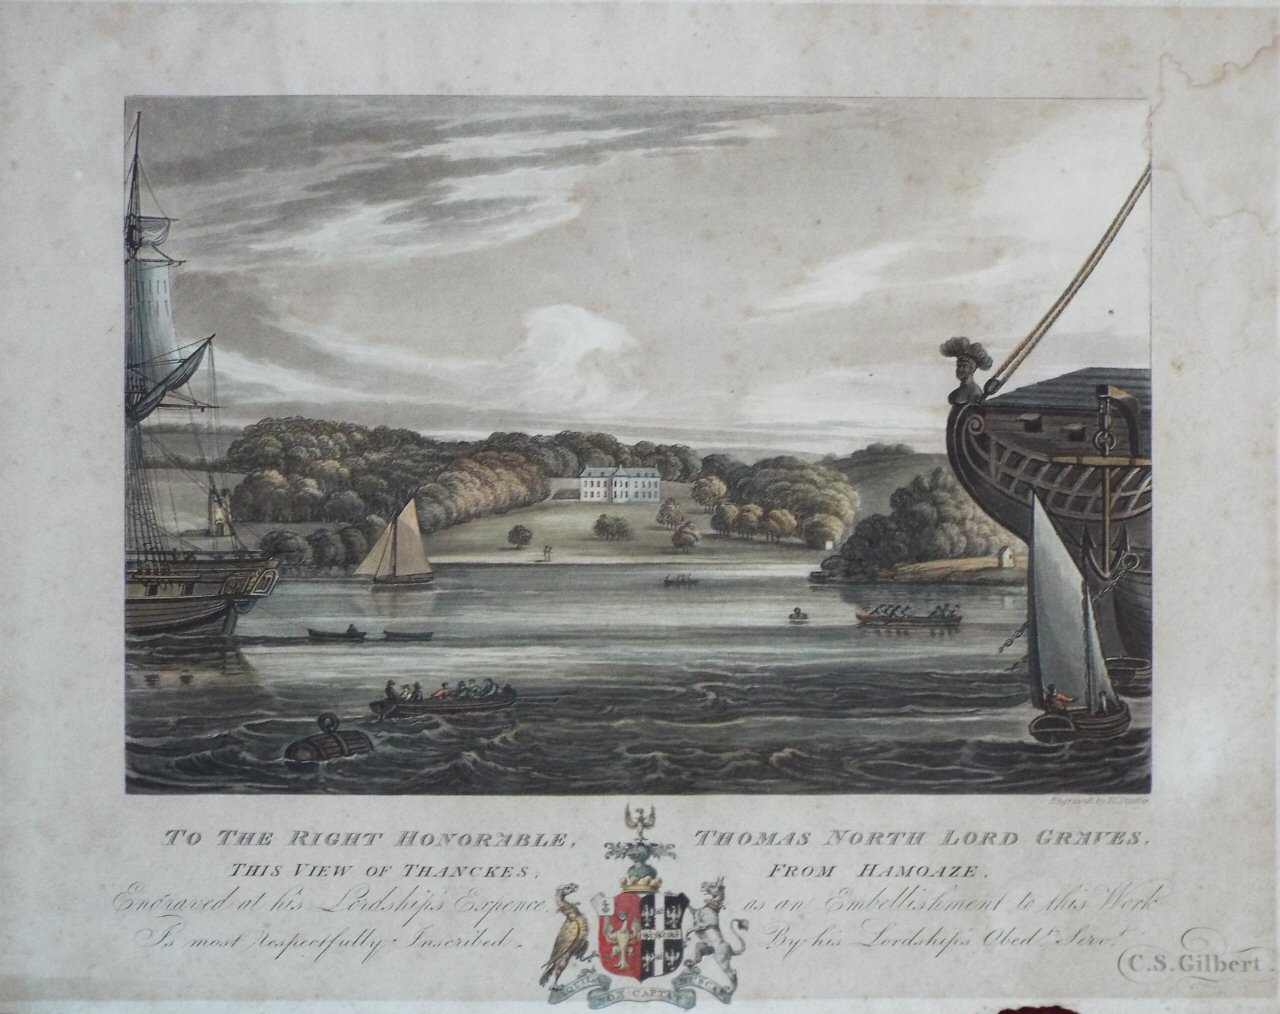 Aquatint - To the Right Honorable, Thomas North Lord Graves, this view of Thanckes, from Hamoaze, etc - Stadler